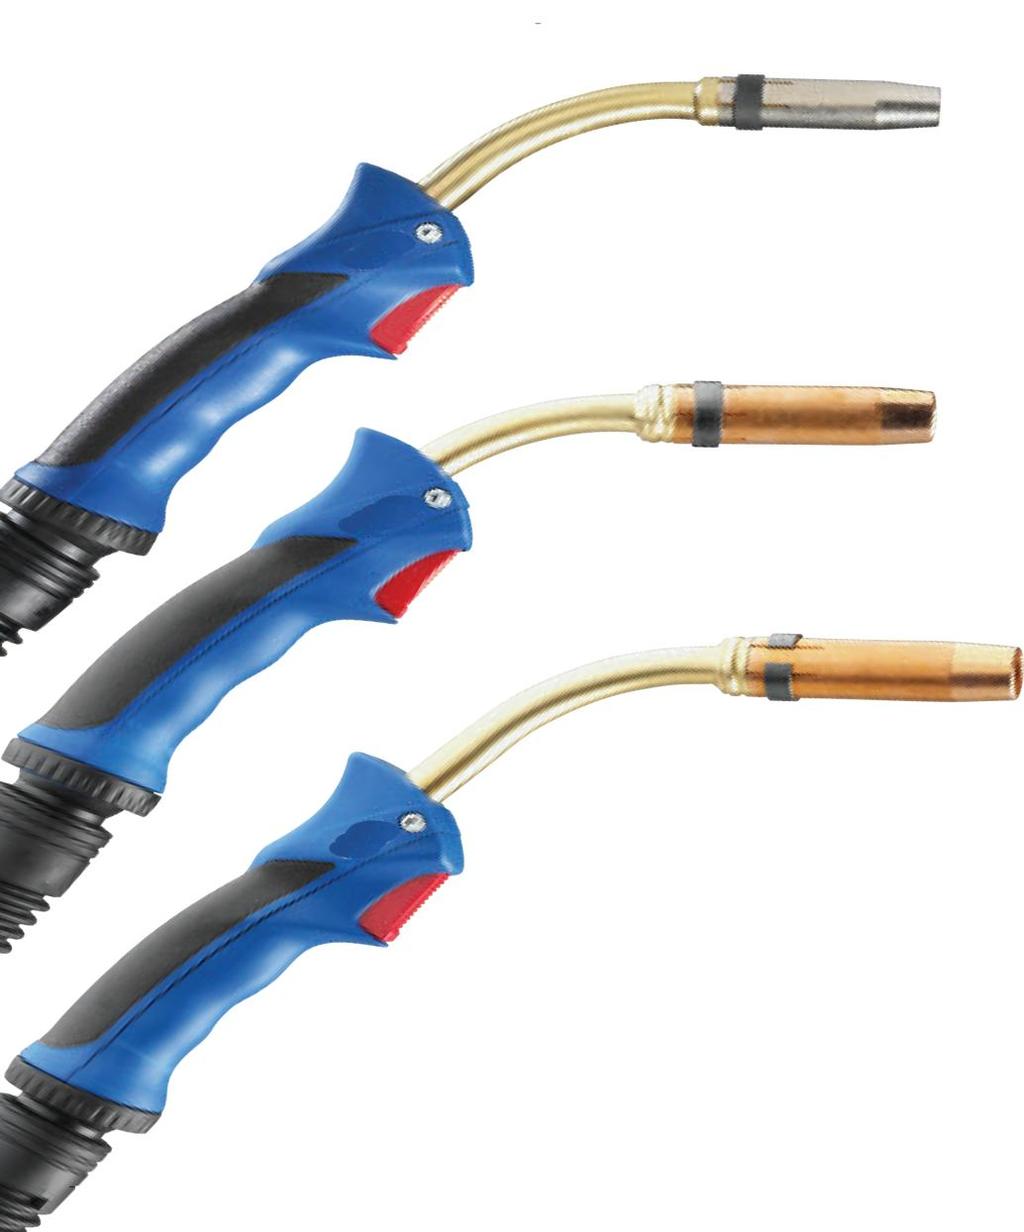 MIG/MAG Welding Torch TFM 401 D / TFM 501 D liquid cooled RT I F I E D N ISO 90 Q E WELDTEC. The right welding torch for every job!